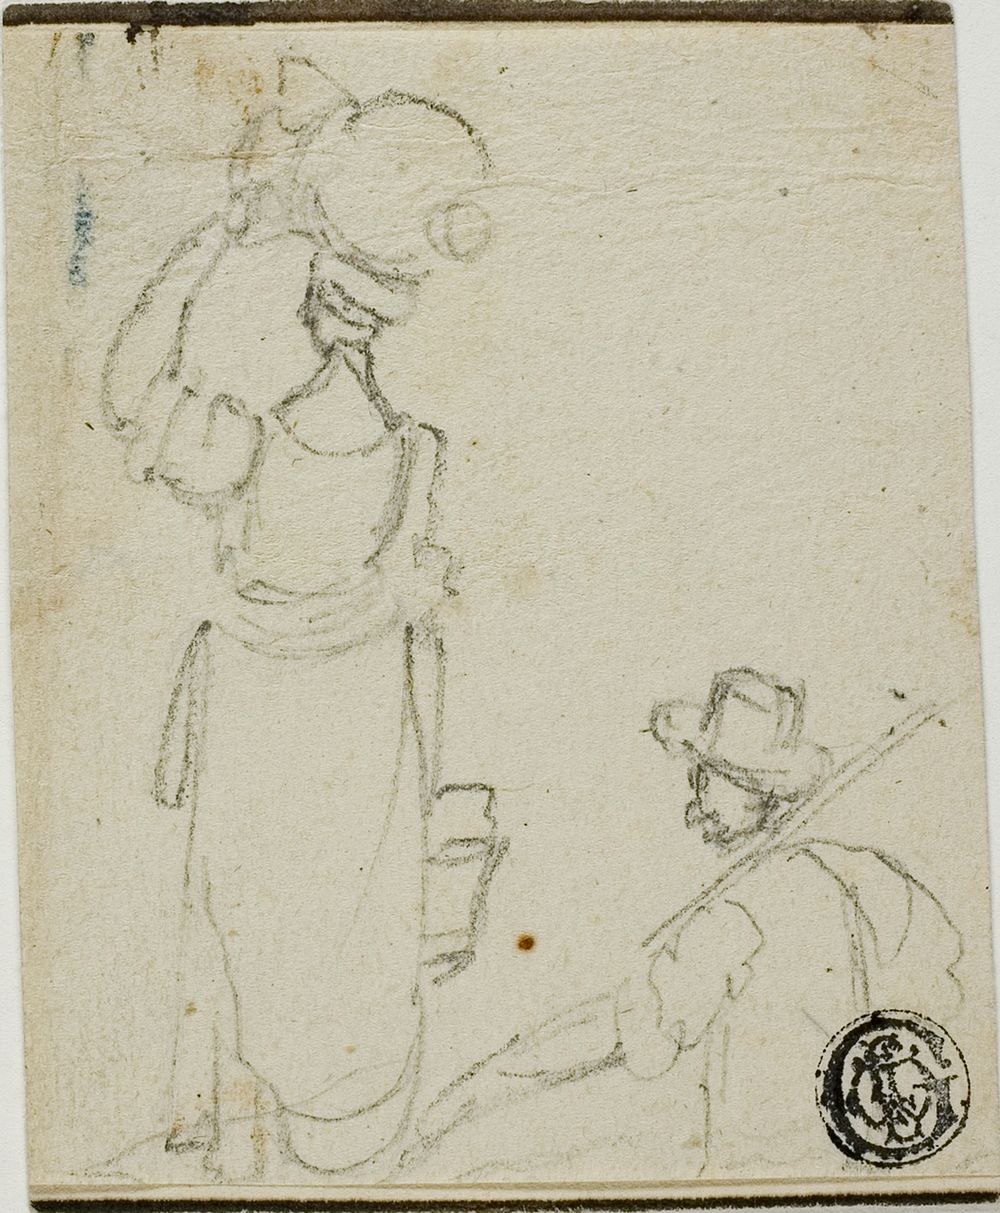 Man with Pole Following Woman with Jug on Head by Unknown